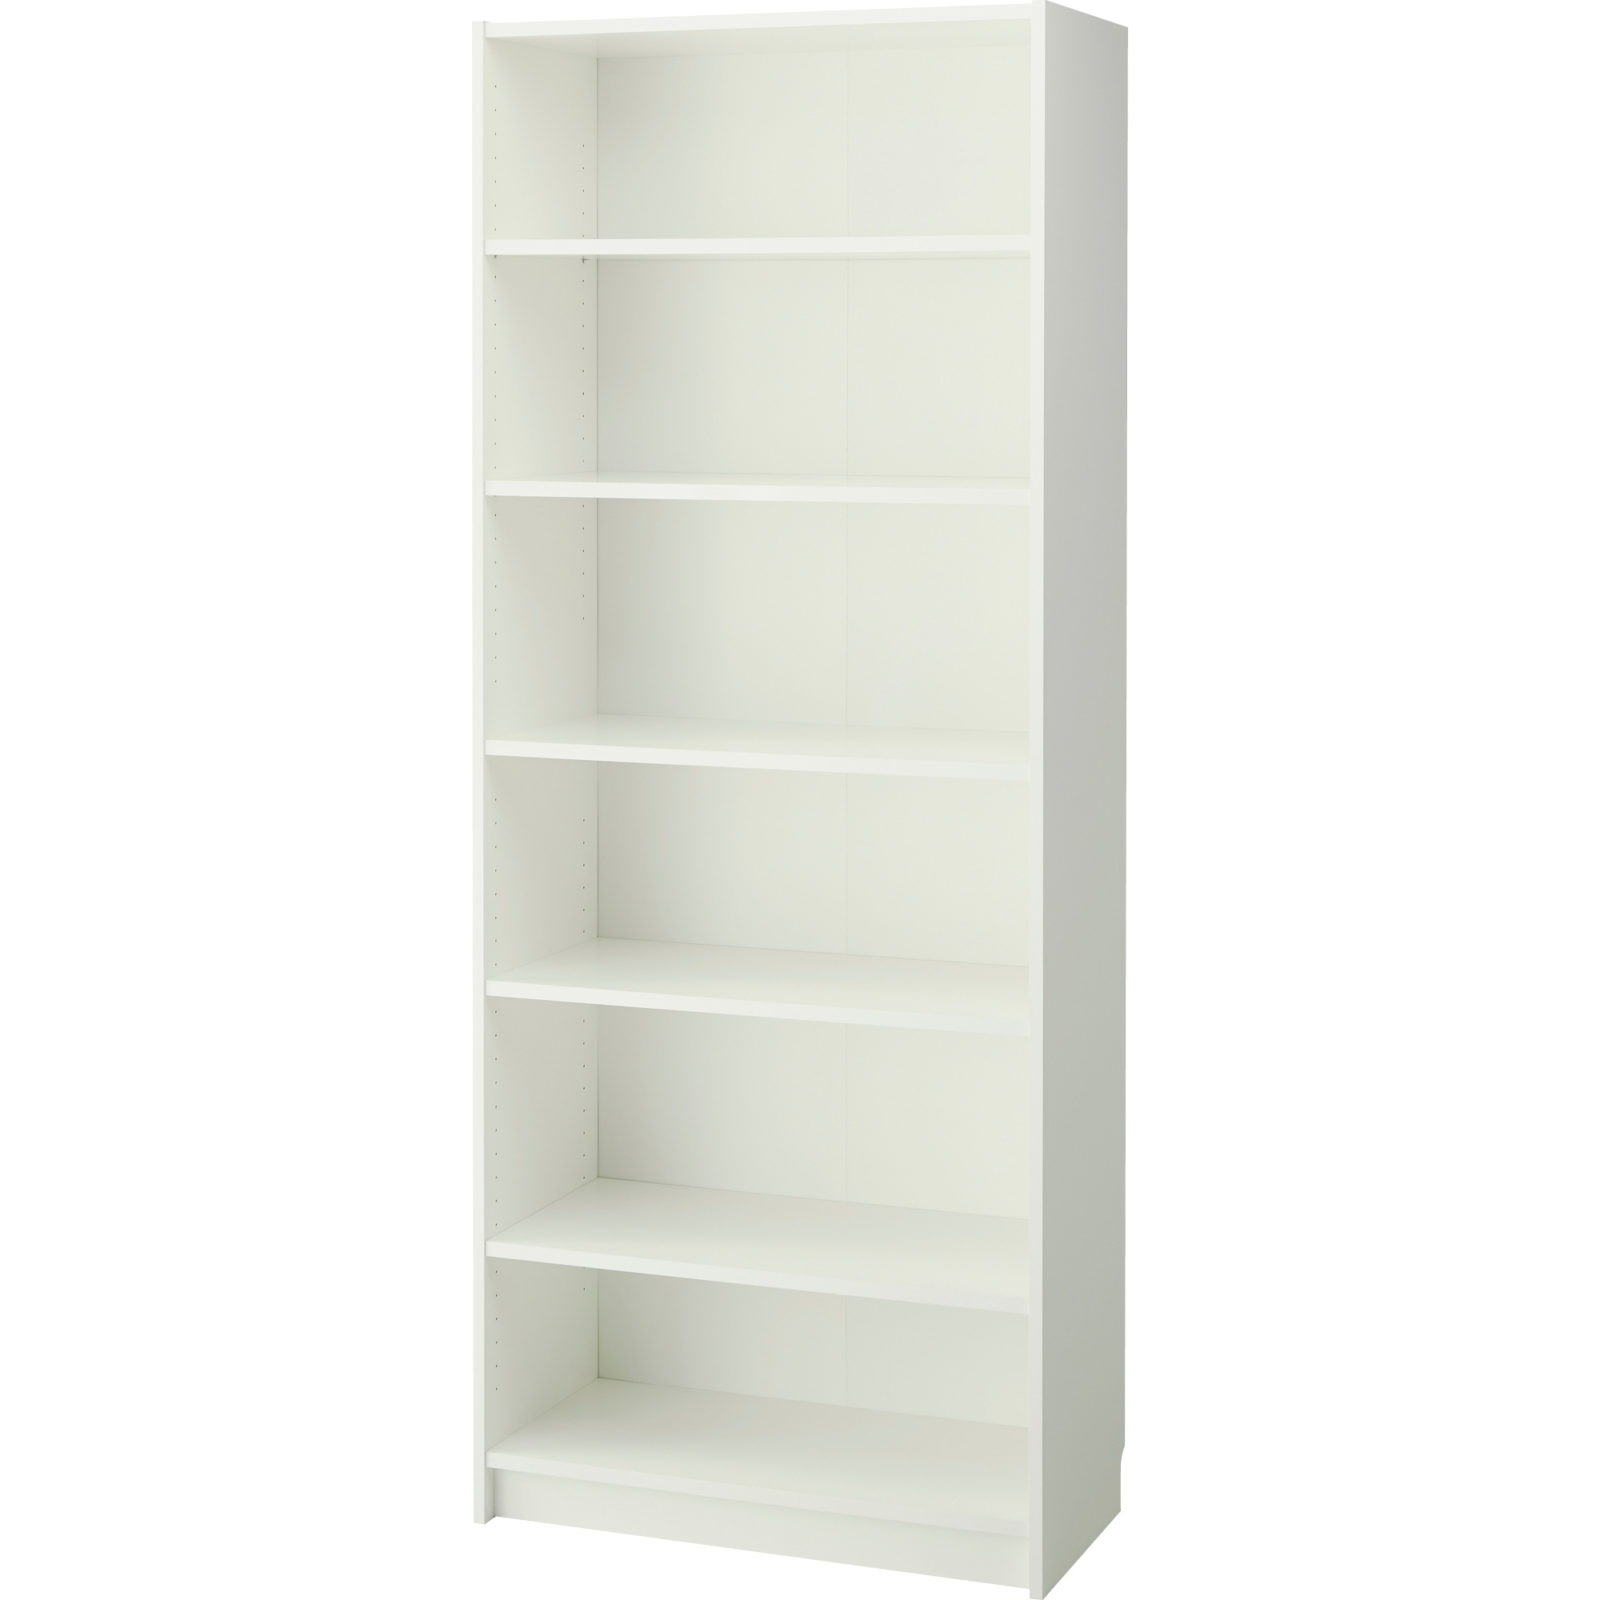 Simple white bookcase, BILLY.